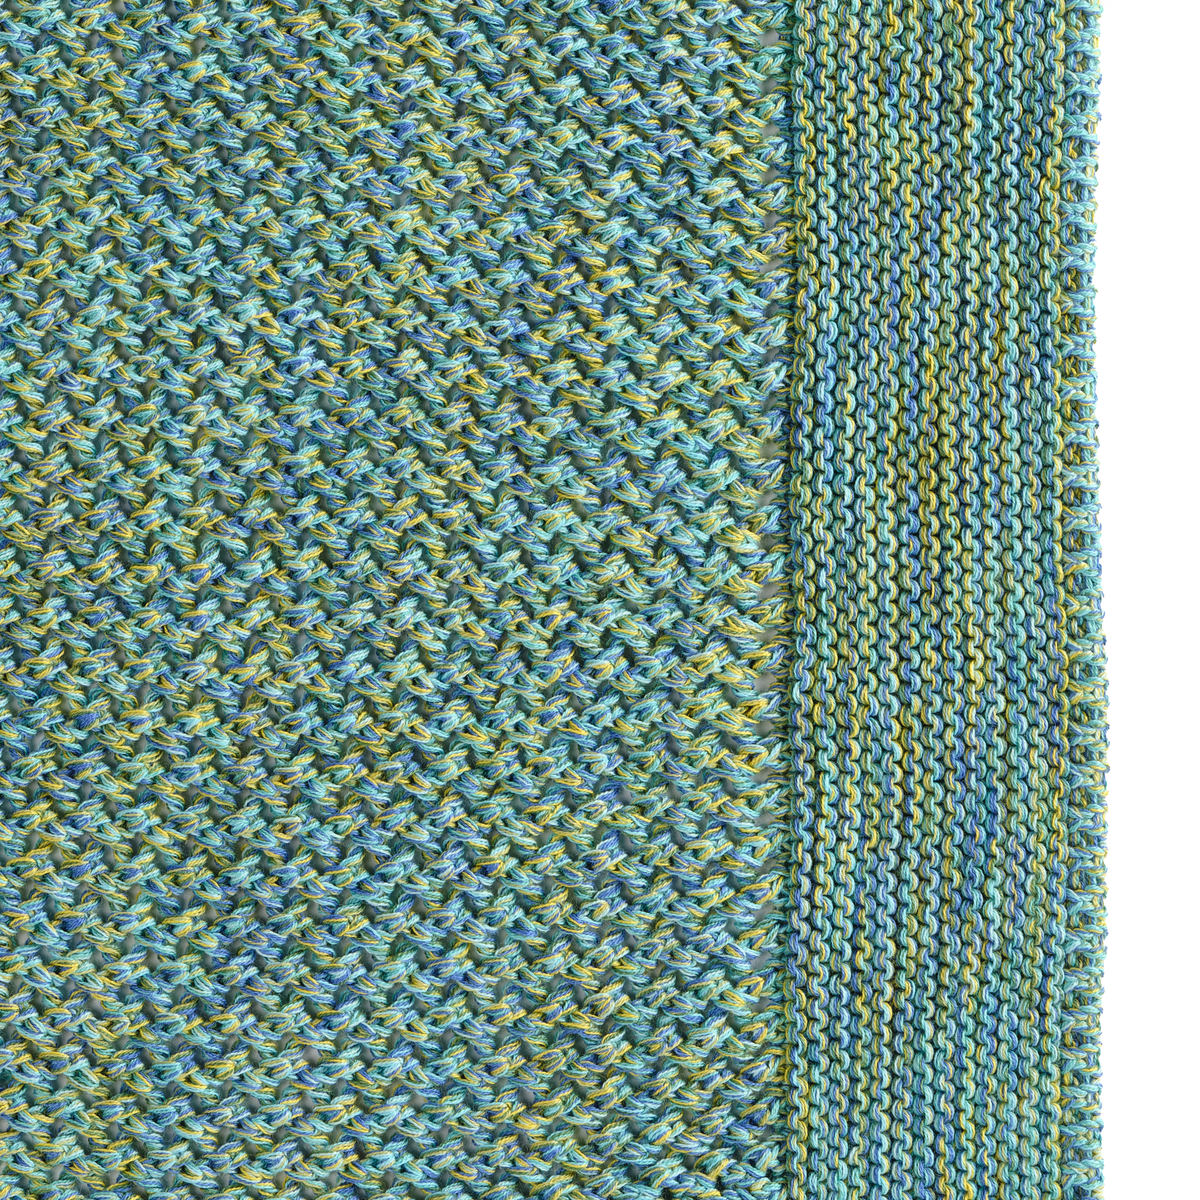 Swatch Sample of Celso de Lemos Balade Throw in Blue Green Color